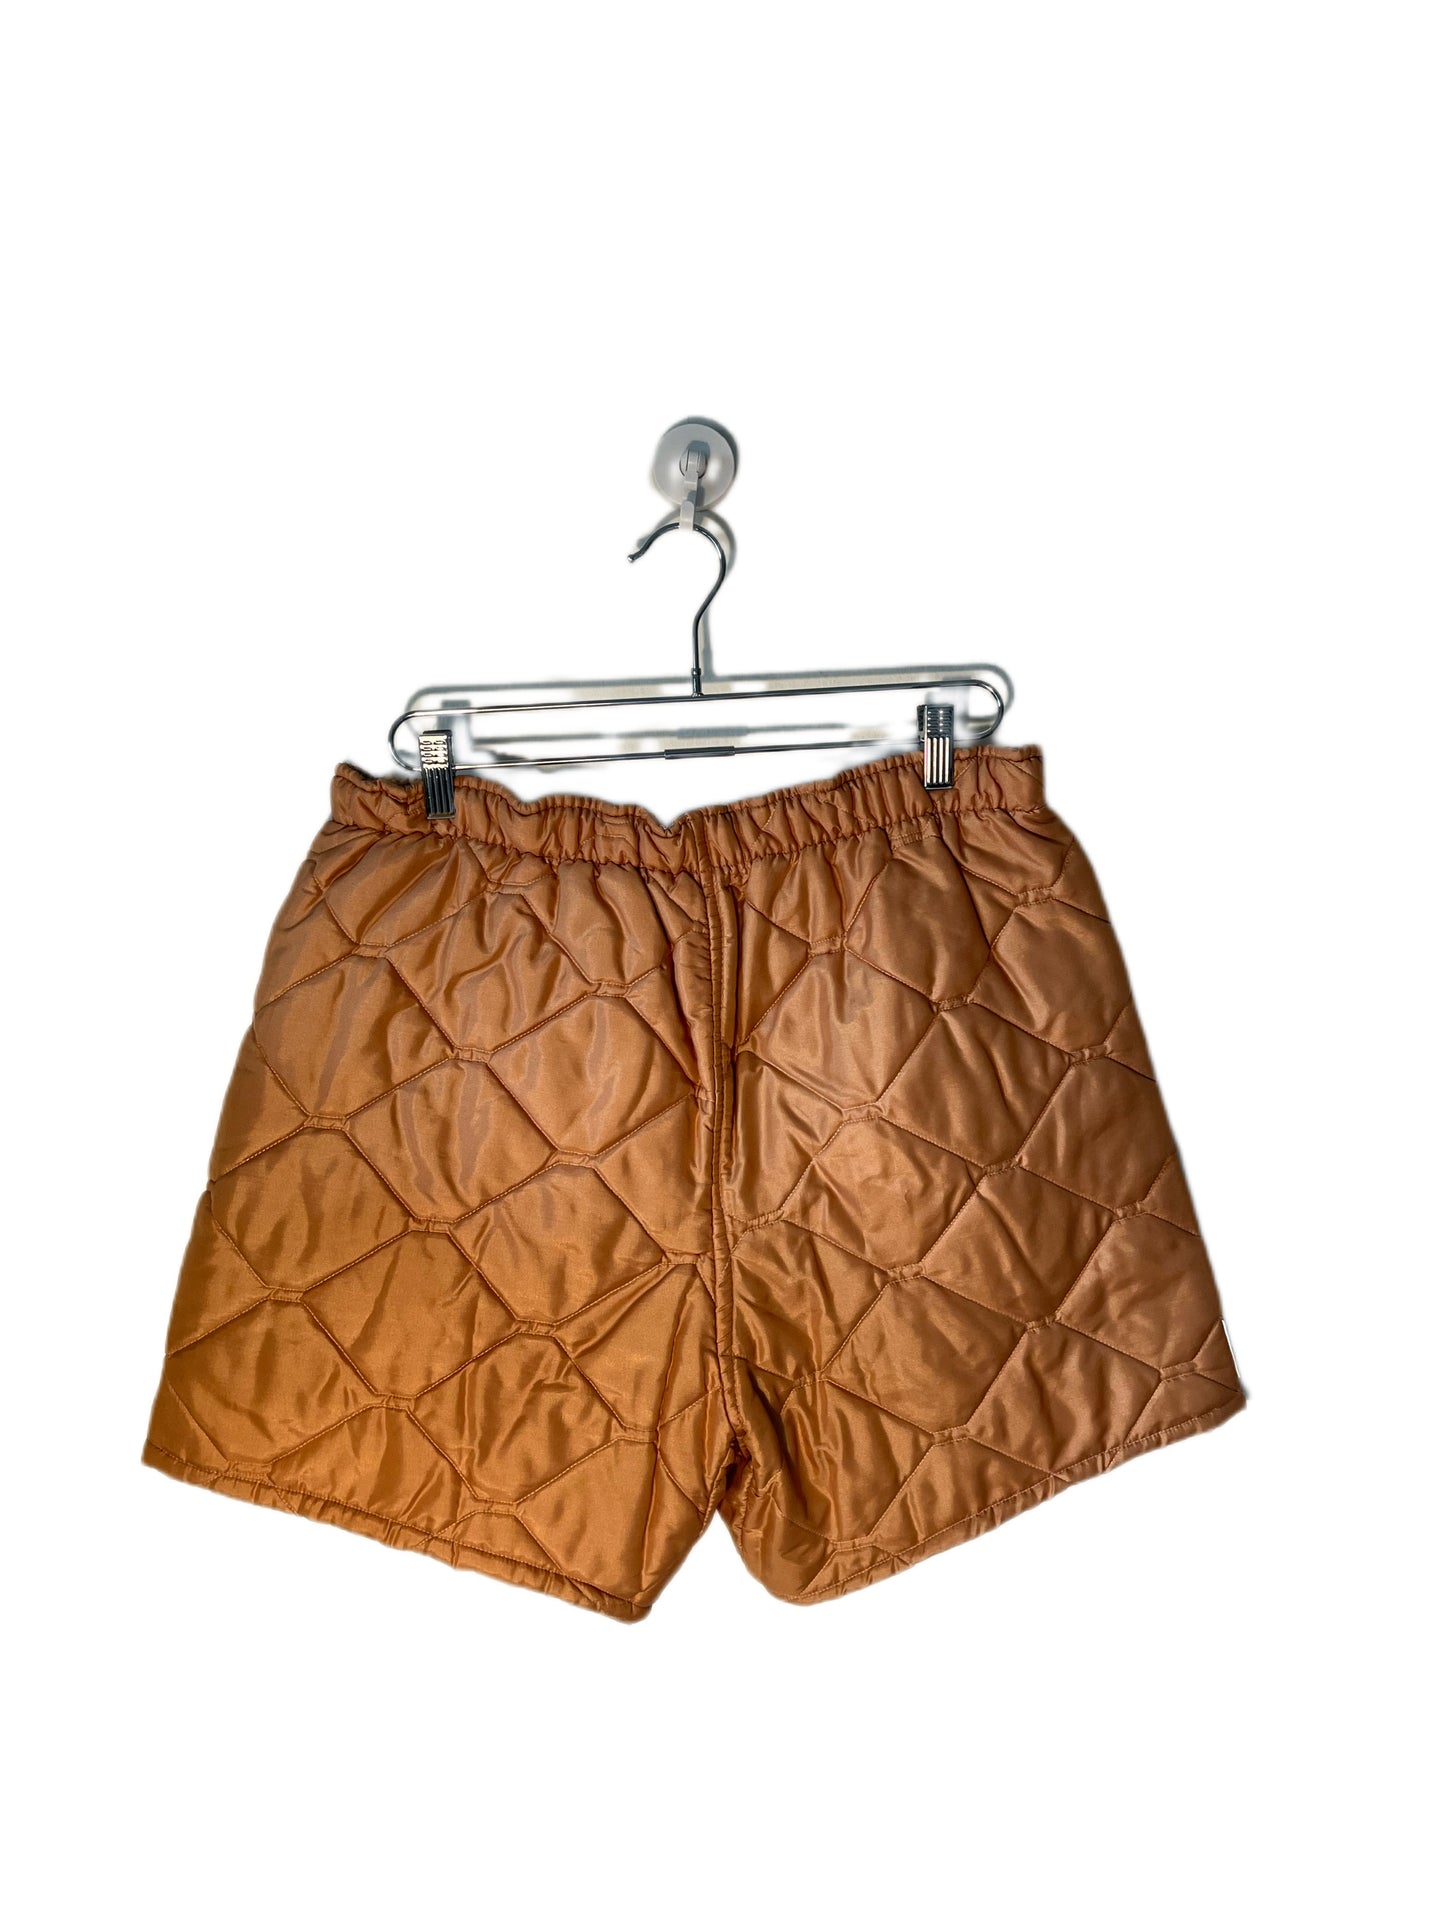 Reworked Vintage Army Liner Shorts